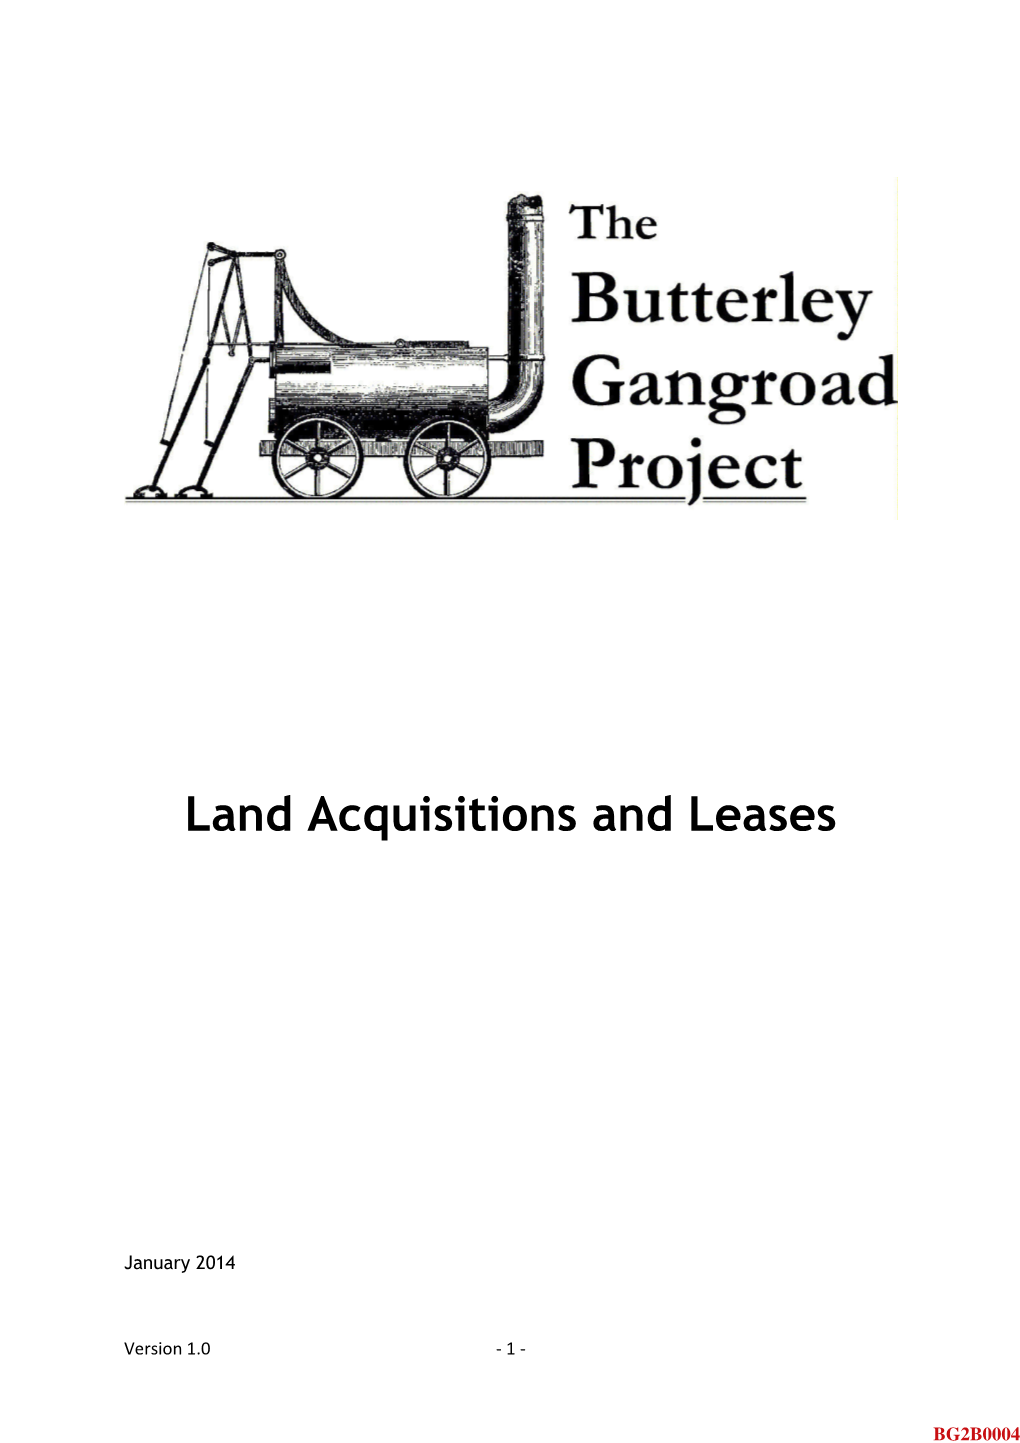 Butterley Company Land Acquisitions and Leases